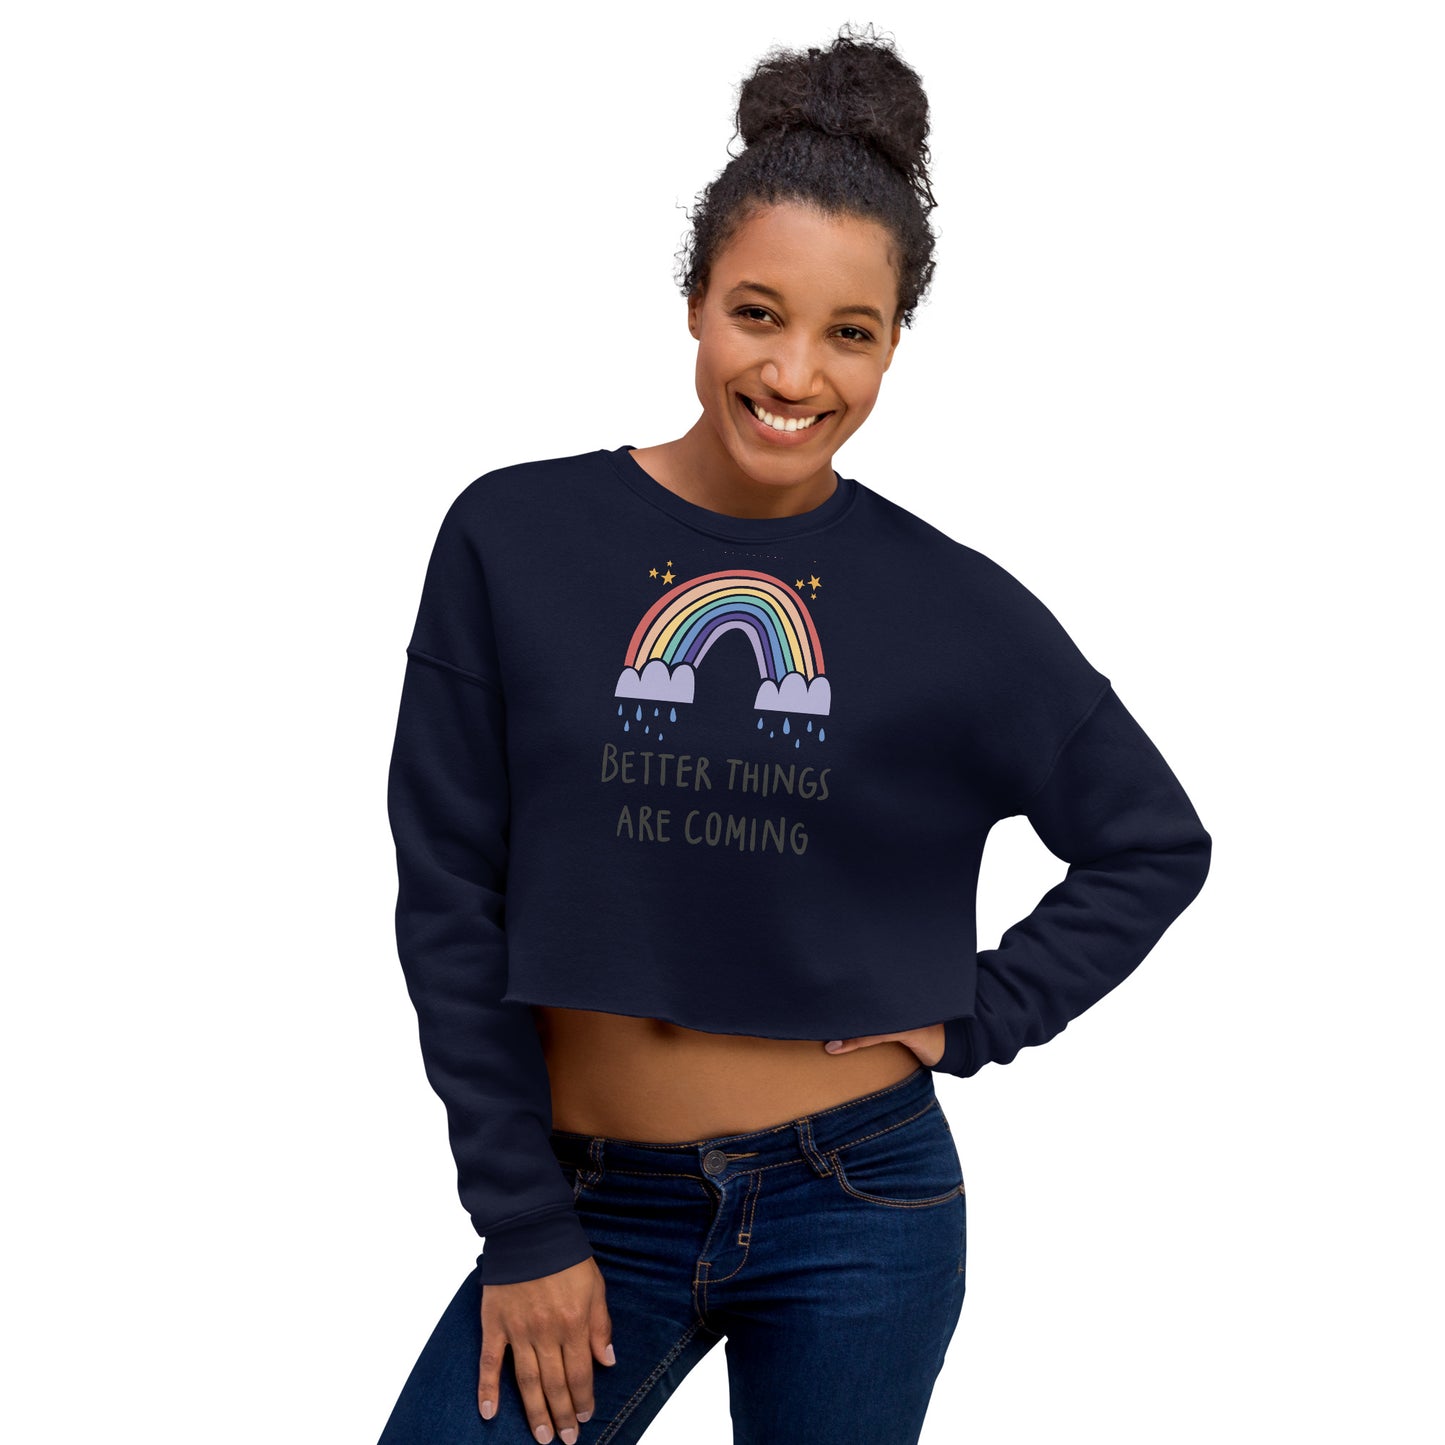 Crop Sweatshirt Womens (Better Things Are Coming- Inspiration 007)